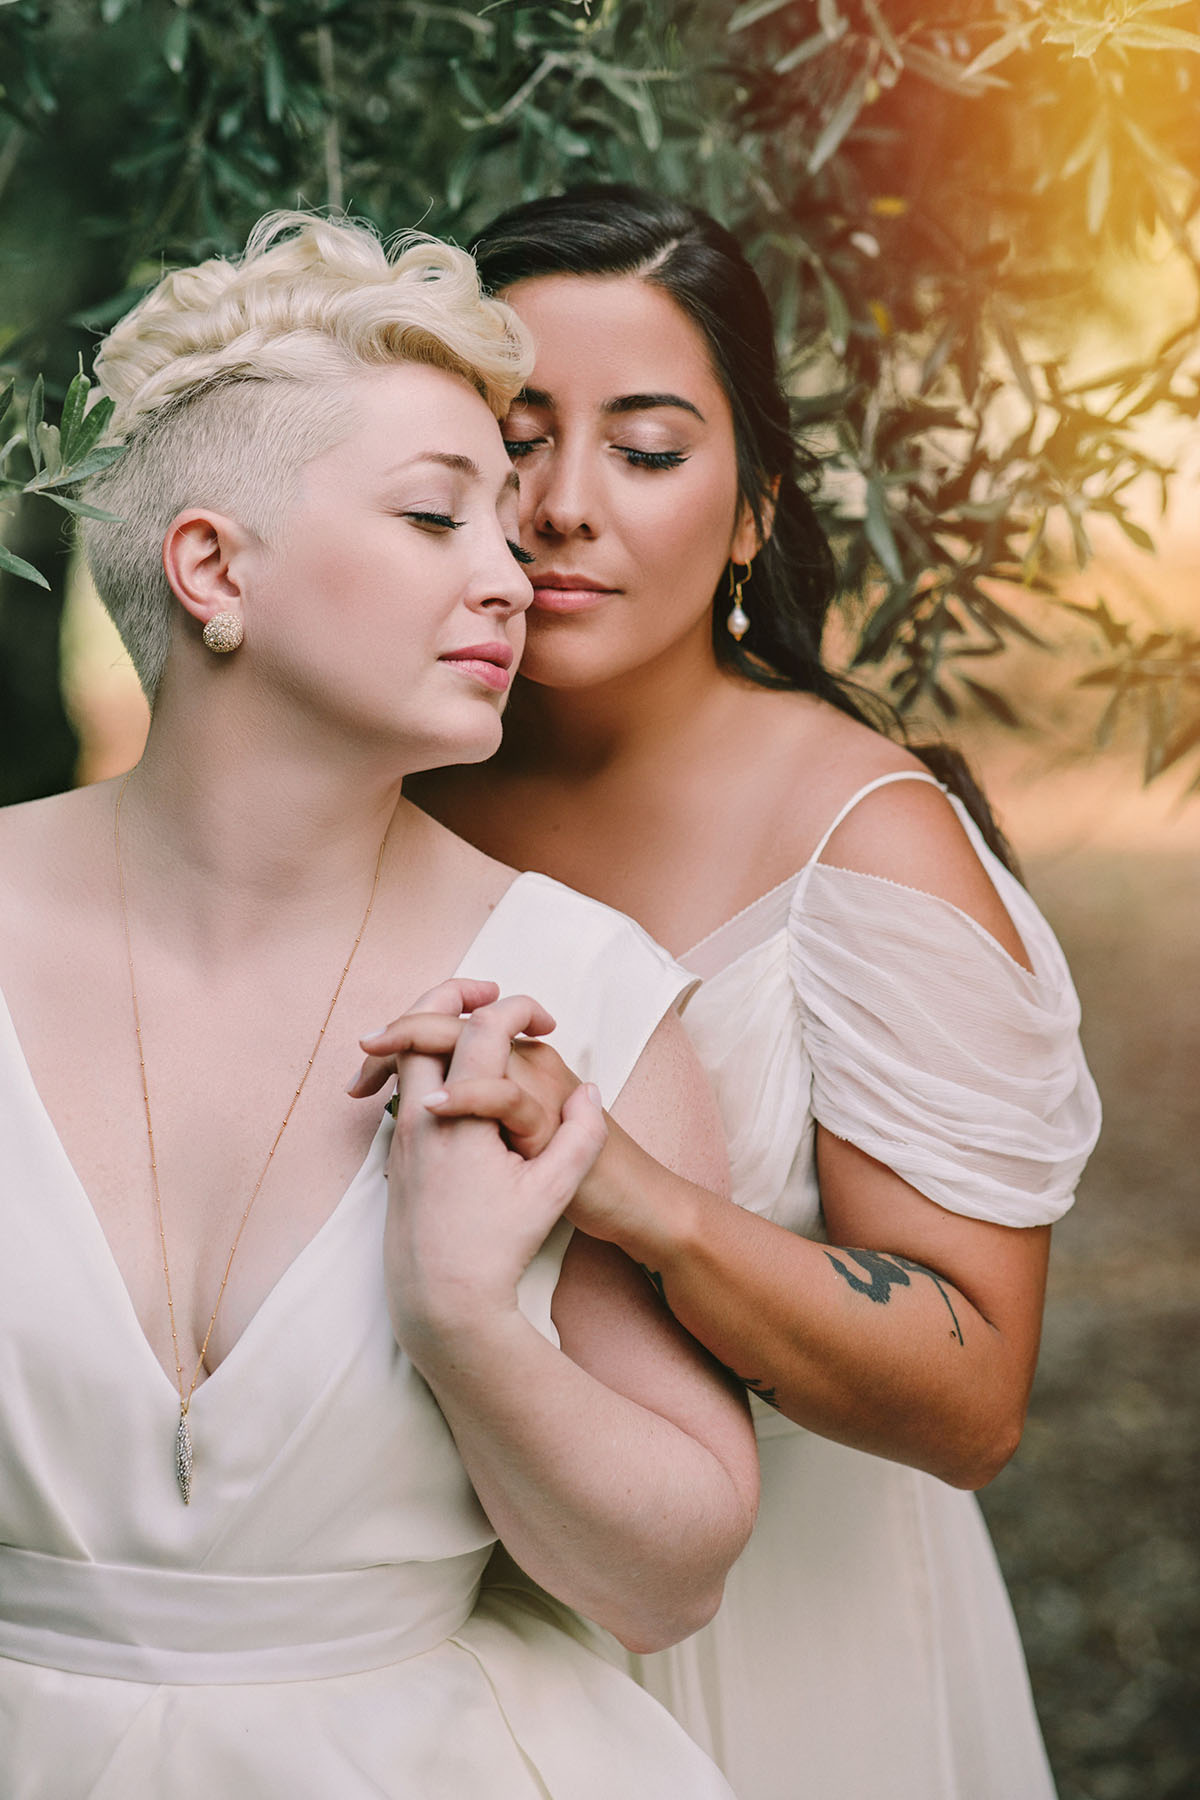 Natural beauty shines in luxury destination wedding in Crete, Greece two brides lesbian wedding nature outdoors greenery hills